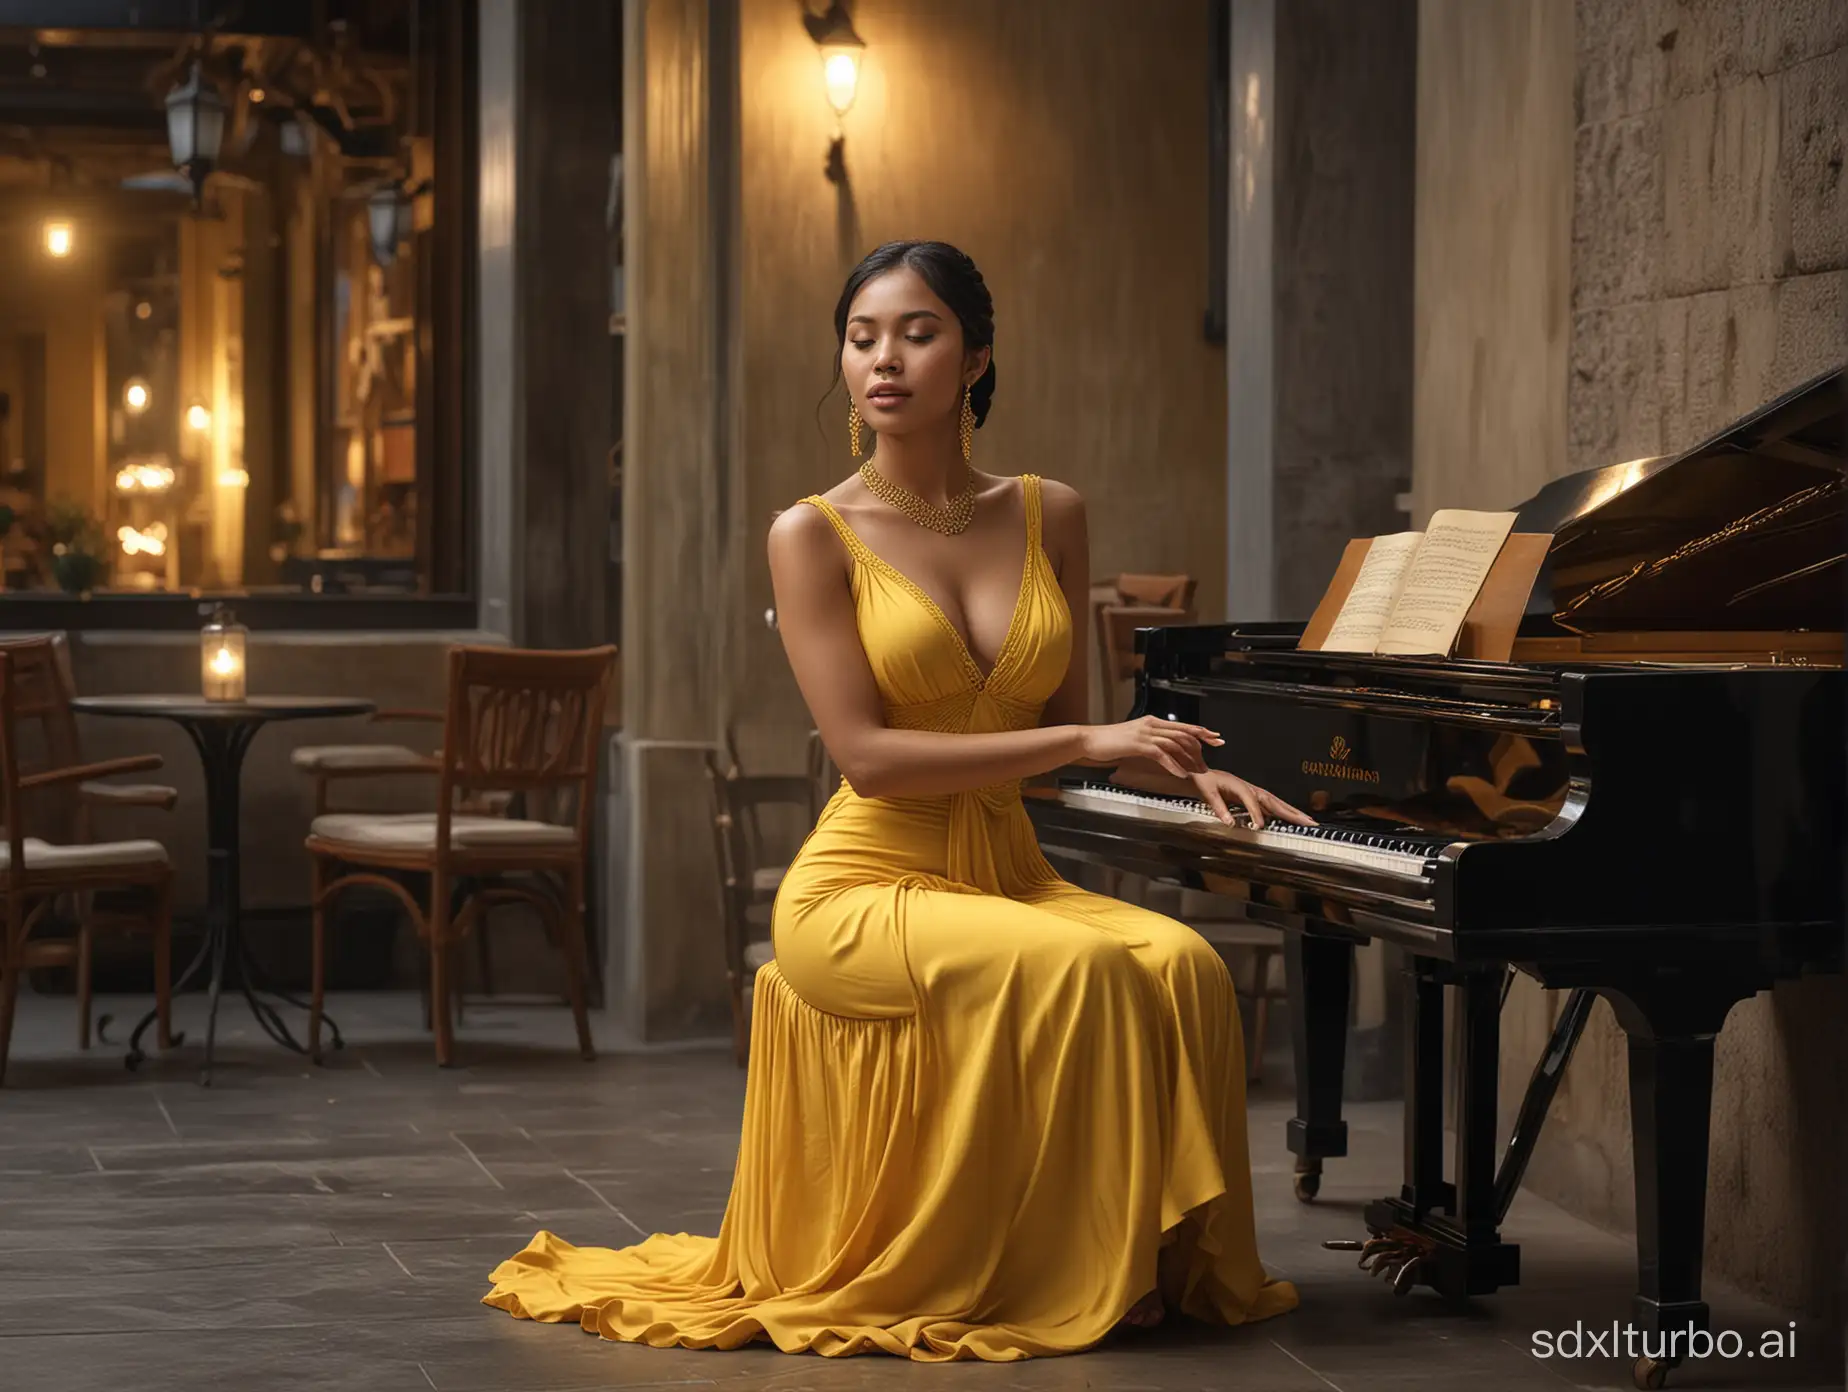 Imagine a 4K oil painting featuring an Indonesian woman in a flowing yellow dress, slim fat body, sitting and gracefully playing a jazz piano in a dimly lit room. Black hair was styled in an intricate braid, accentuated with dangling earrings and a sparkling necklace. With closed eyes and a soulful expression, he pours his heart into the music, captivating the audience with his talent and passion. dimly lit luxury outdoor cafe background